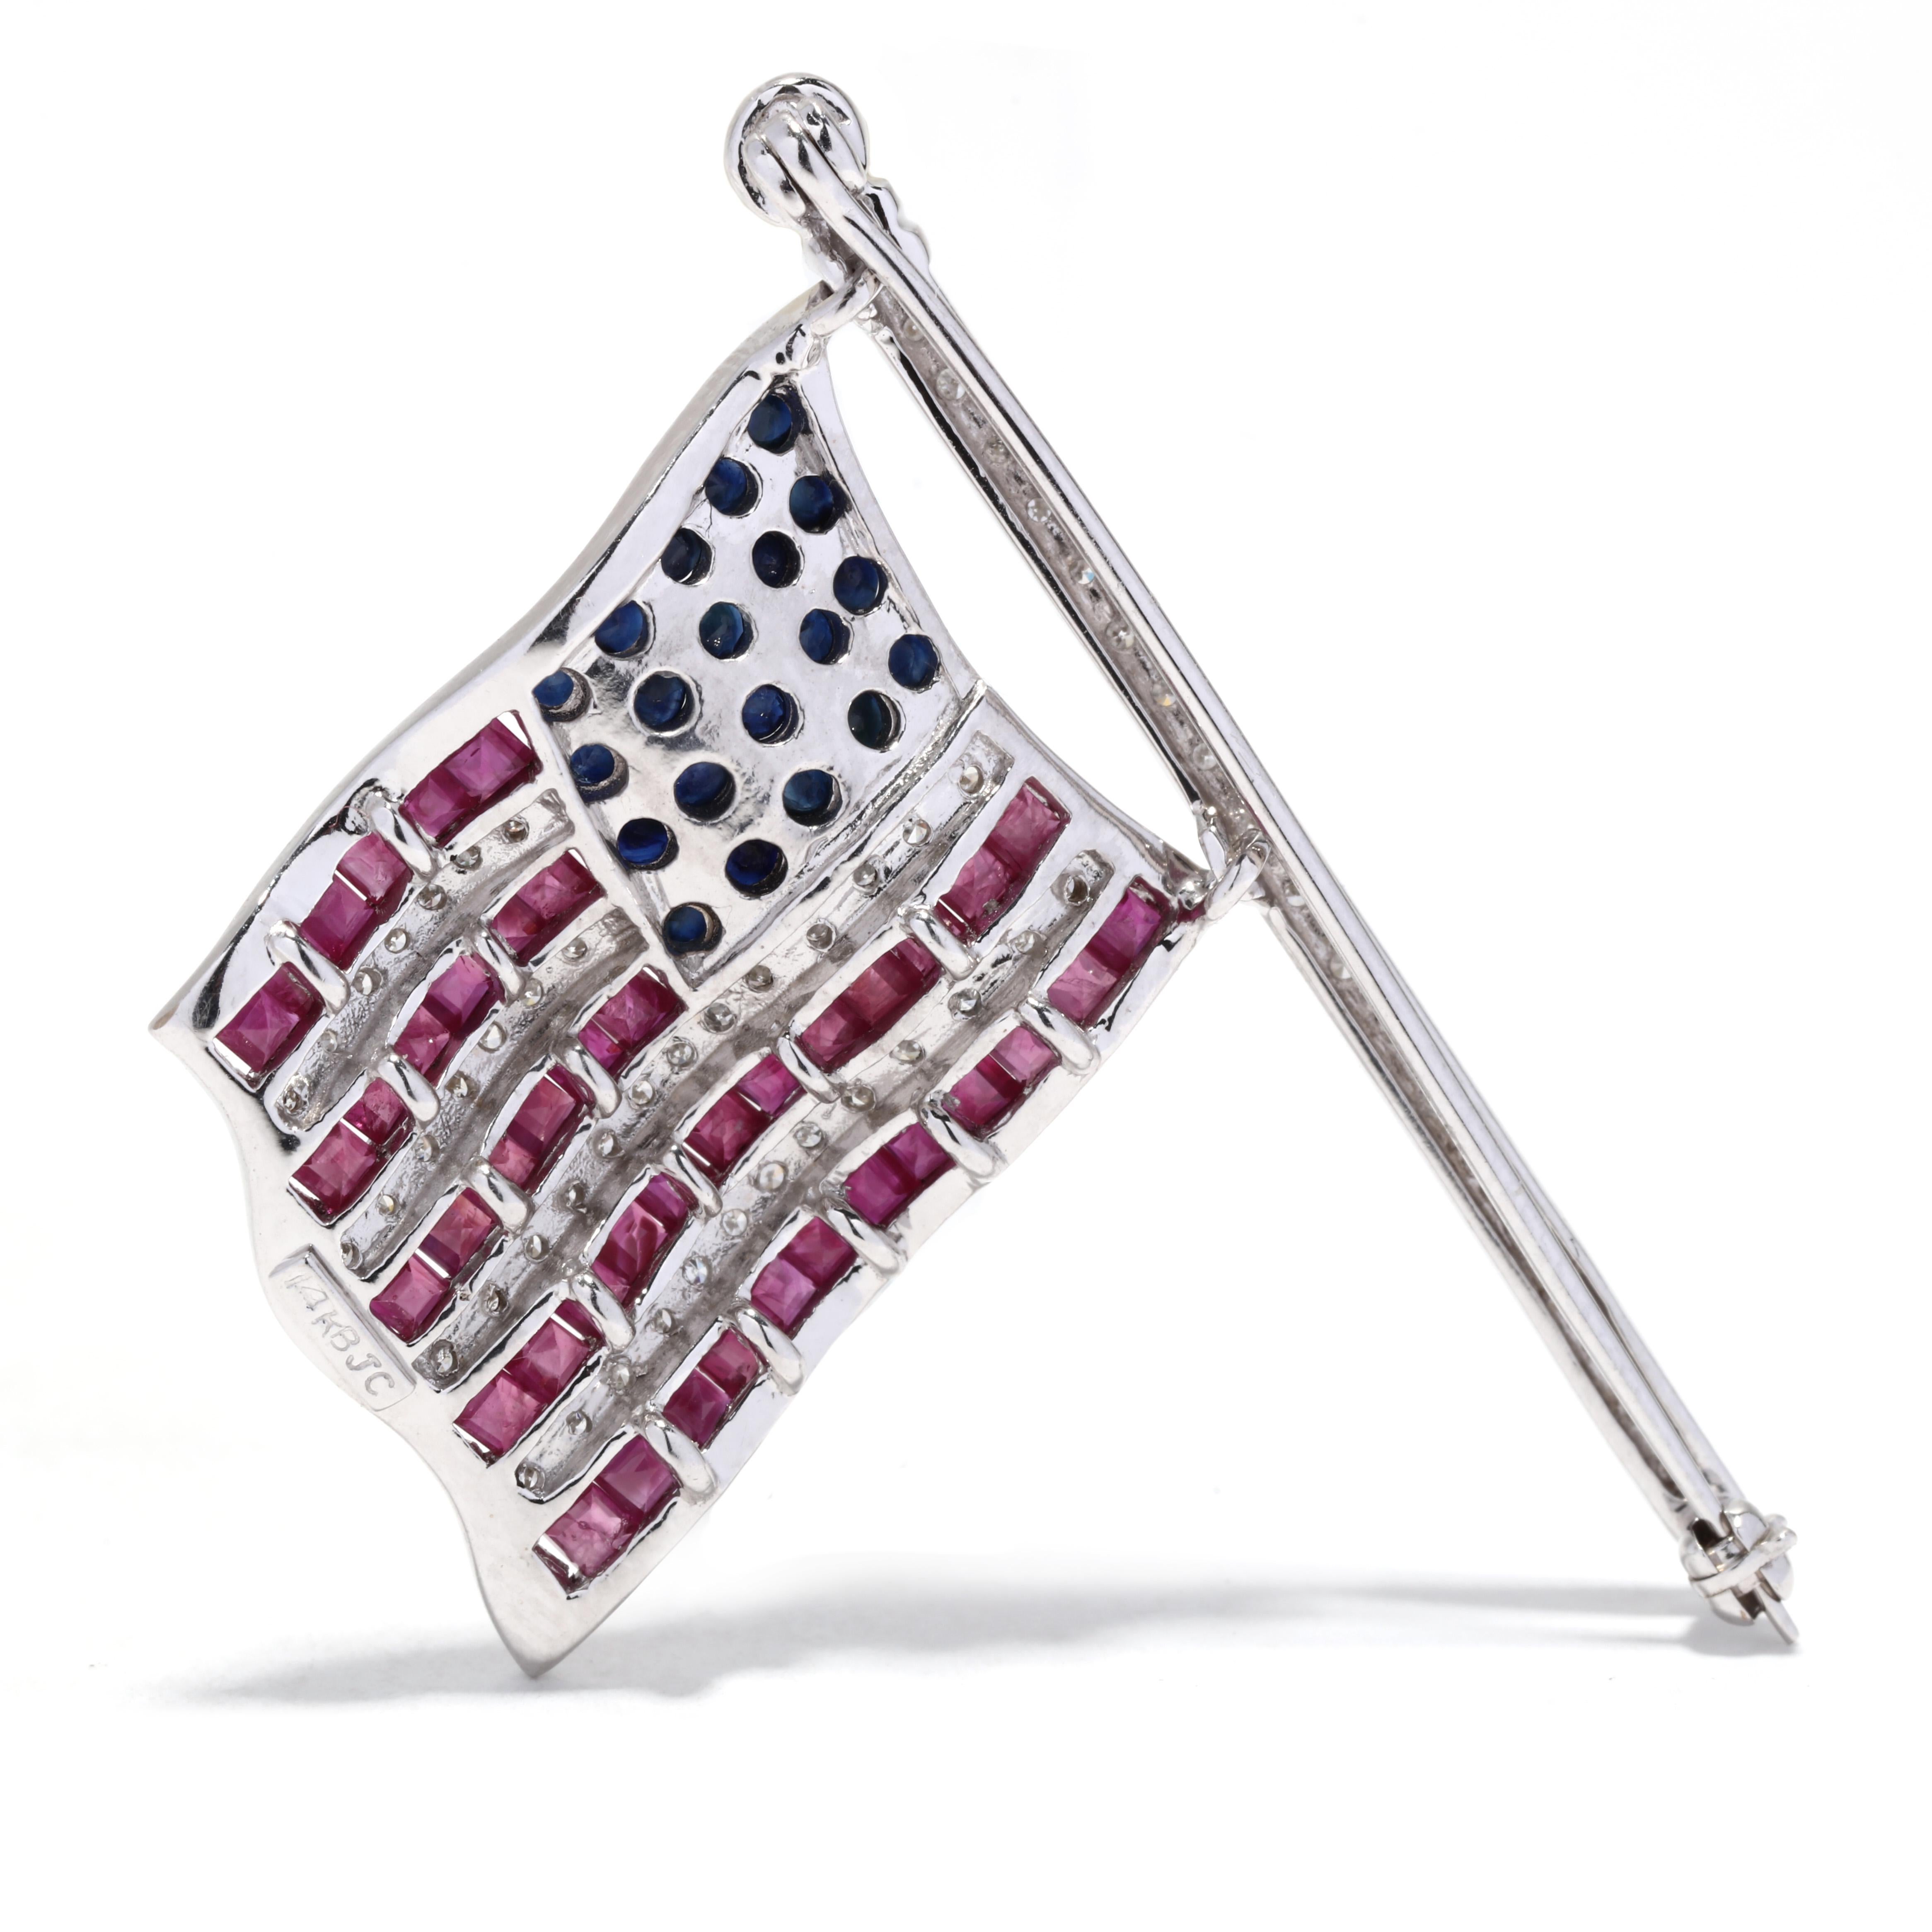 This exquisite 14K white gold American Flag brooch is the perfect way to show your patriotism. Featuring 2.5ctw of natural rubies, sapphires, and diamonds, this intricate and articulate design measures 1 5/8 inches long and is sure to be a